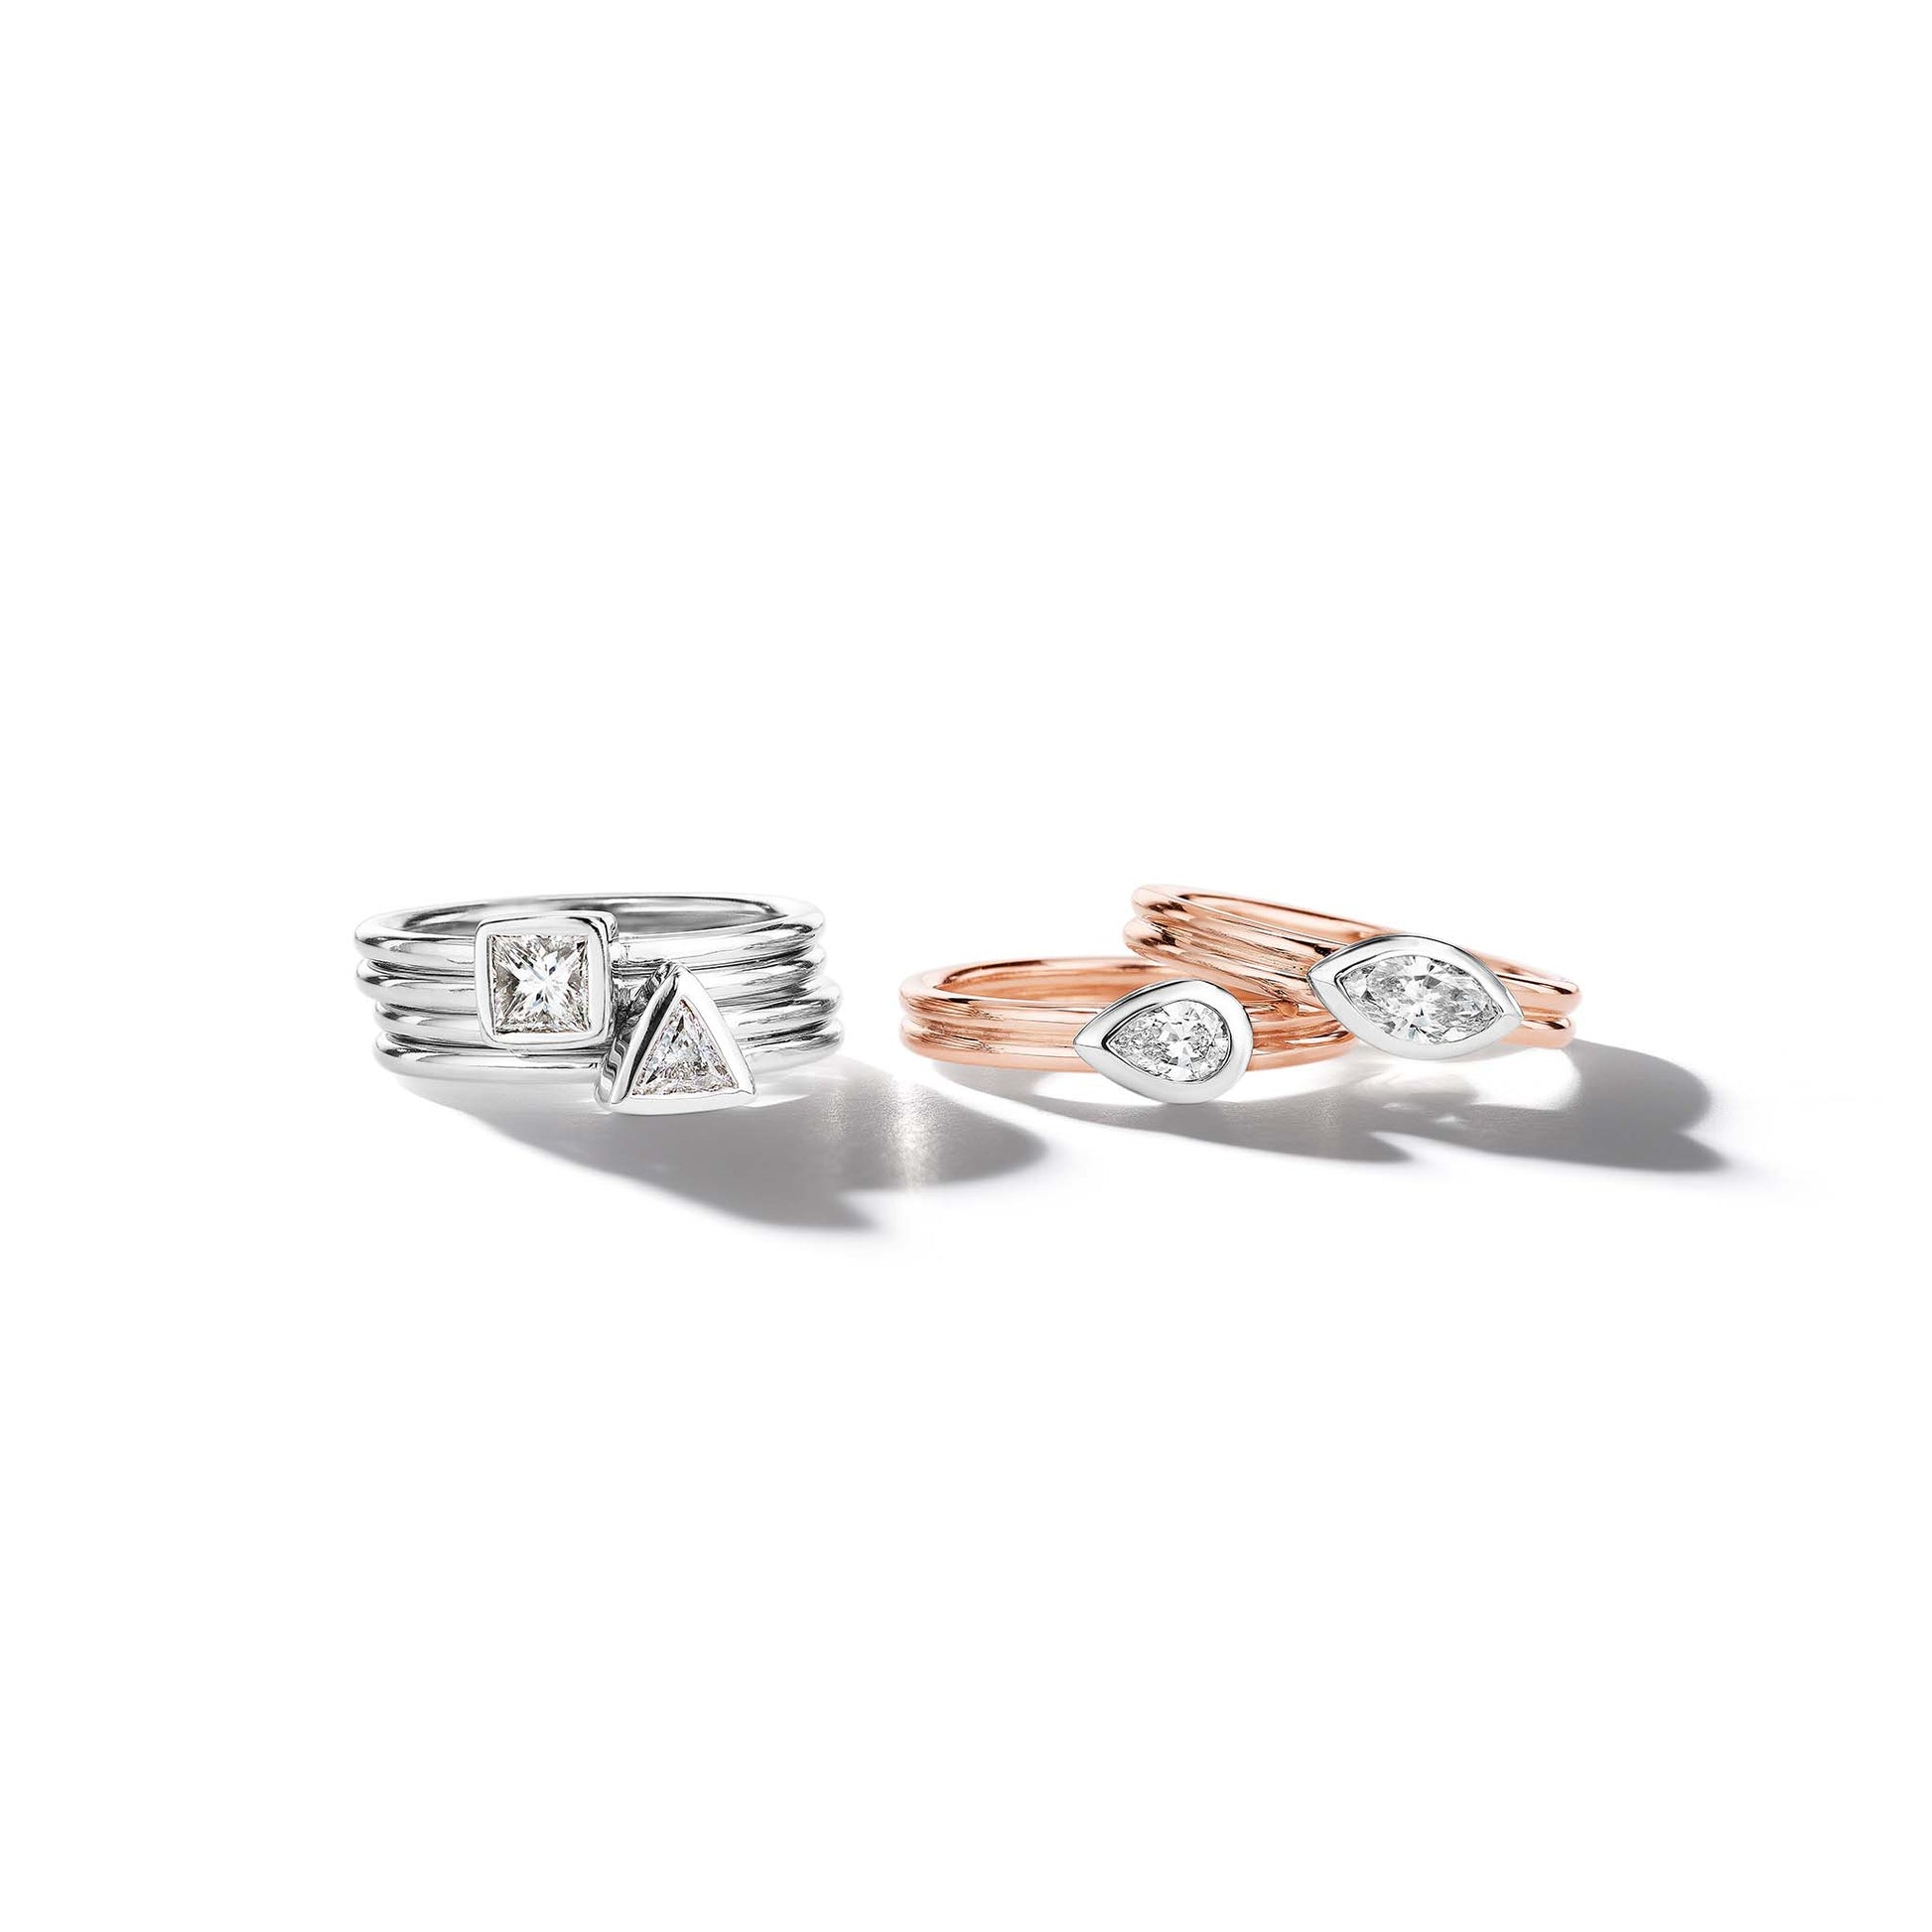 Mimi So Piece Collection rings stackable stacked